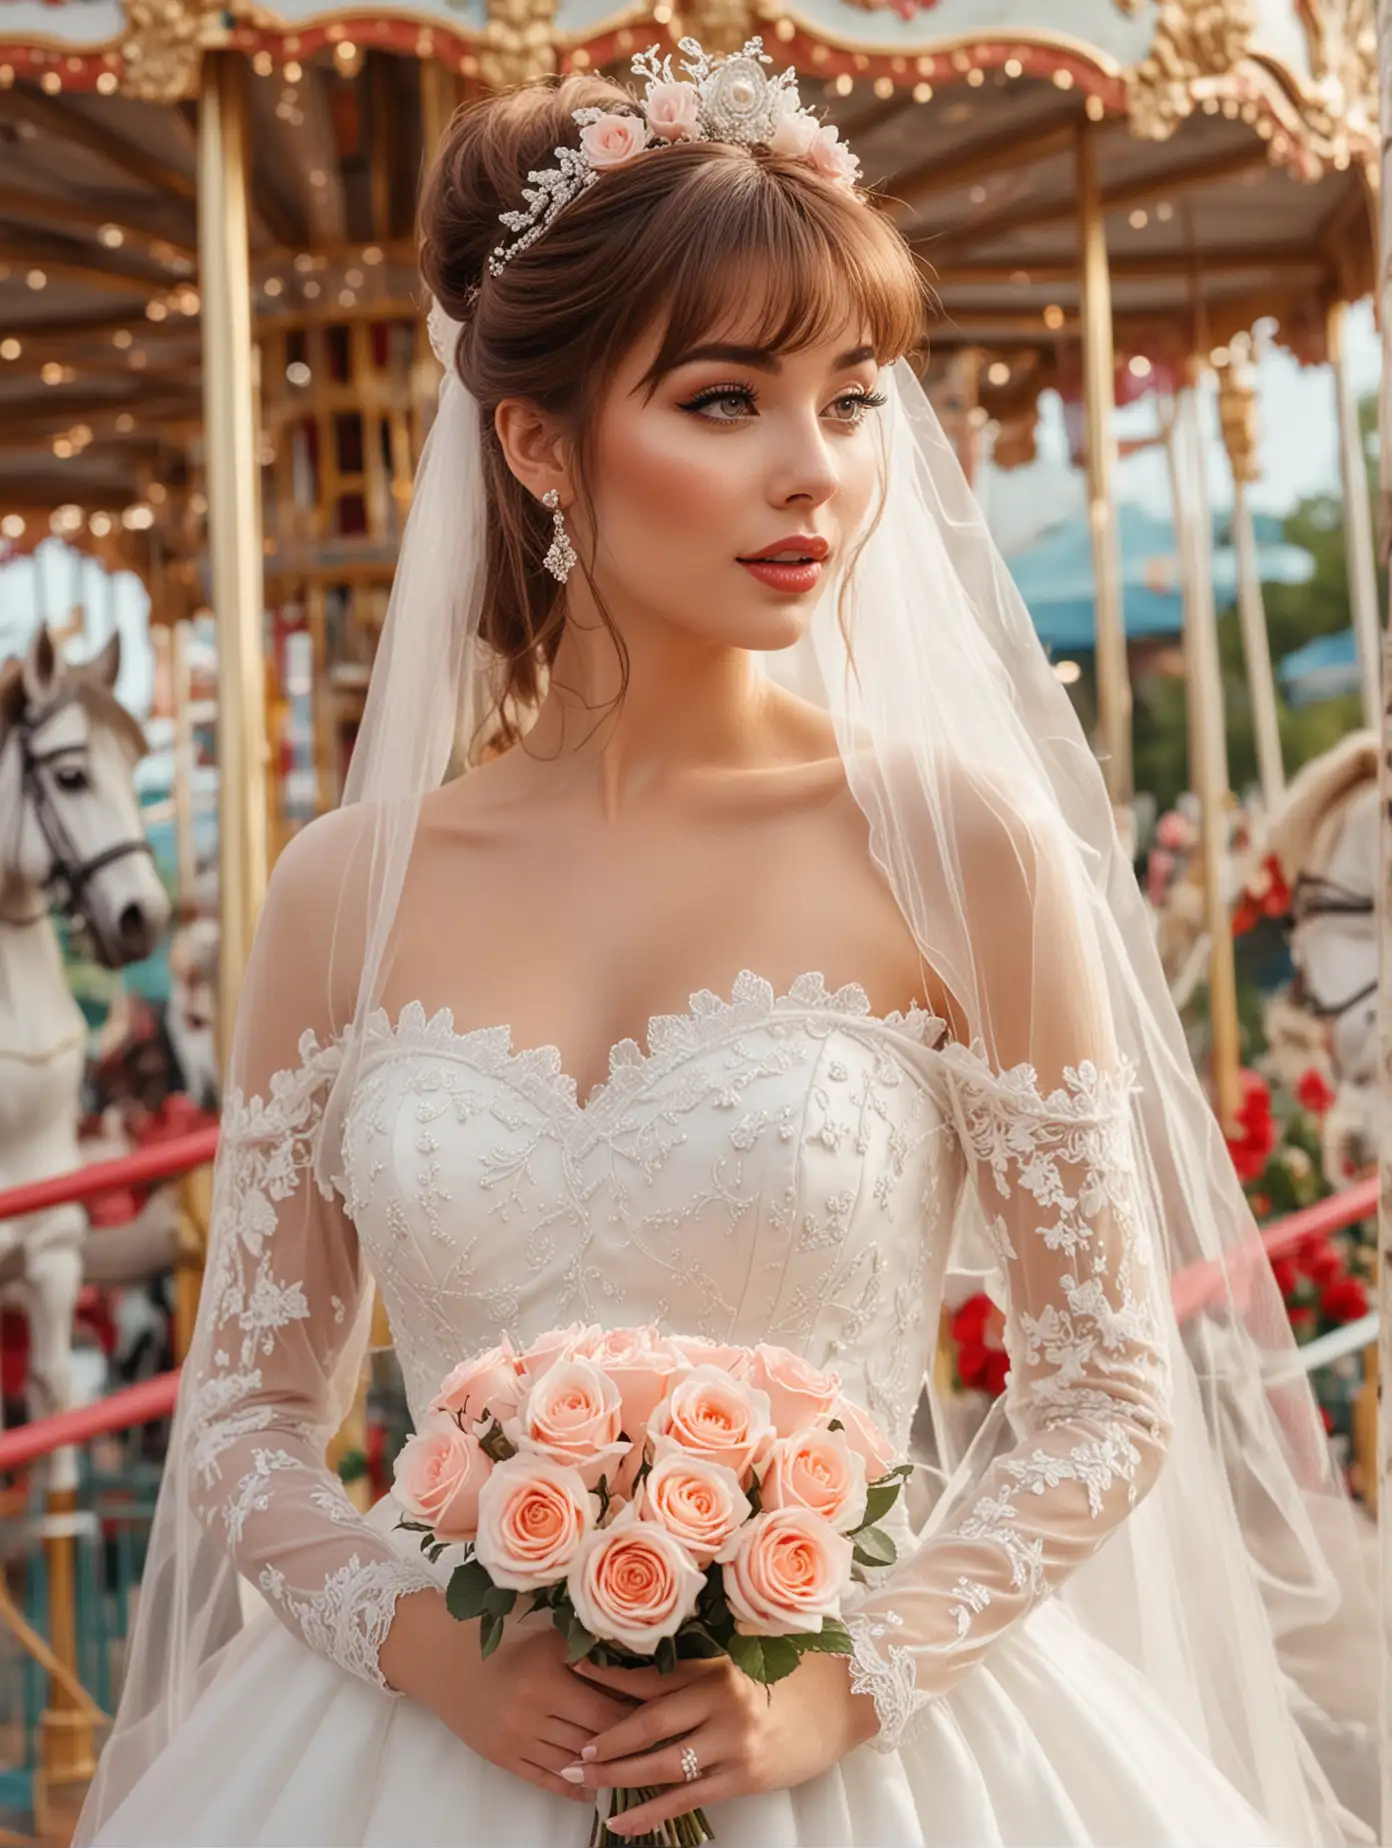 A beautiful woman in a white wedding dress with lace and tulle stands near the carousel at an amusement park. She is holding a bouquet of roses, with her hair styled in an elegant half-up style and flowing straight bangs. She has soft glam makeup with glossy lips and a white veil over her head. The scene has luxurious fashion, vibrant colors and bright daylight, creating a dreamy atmosphere